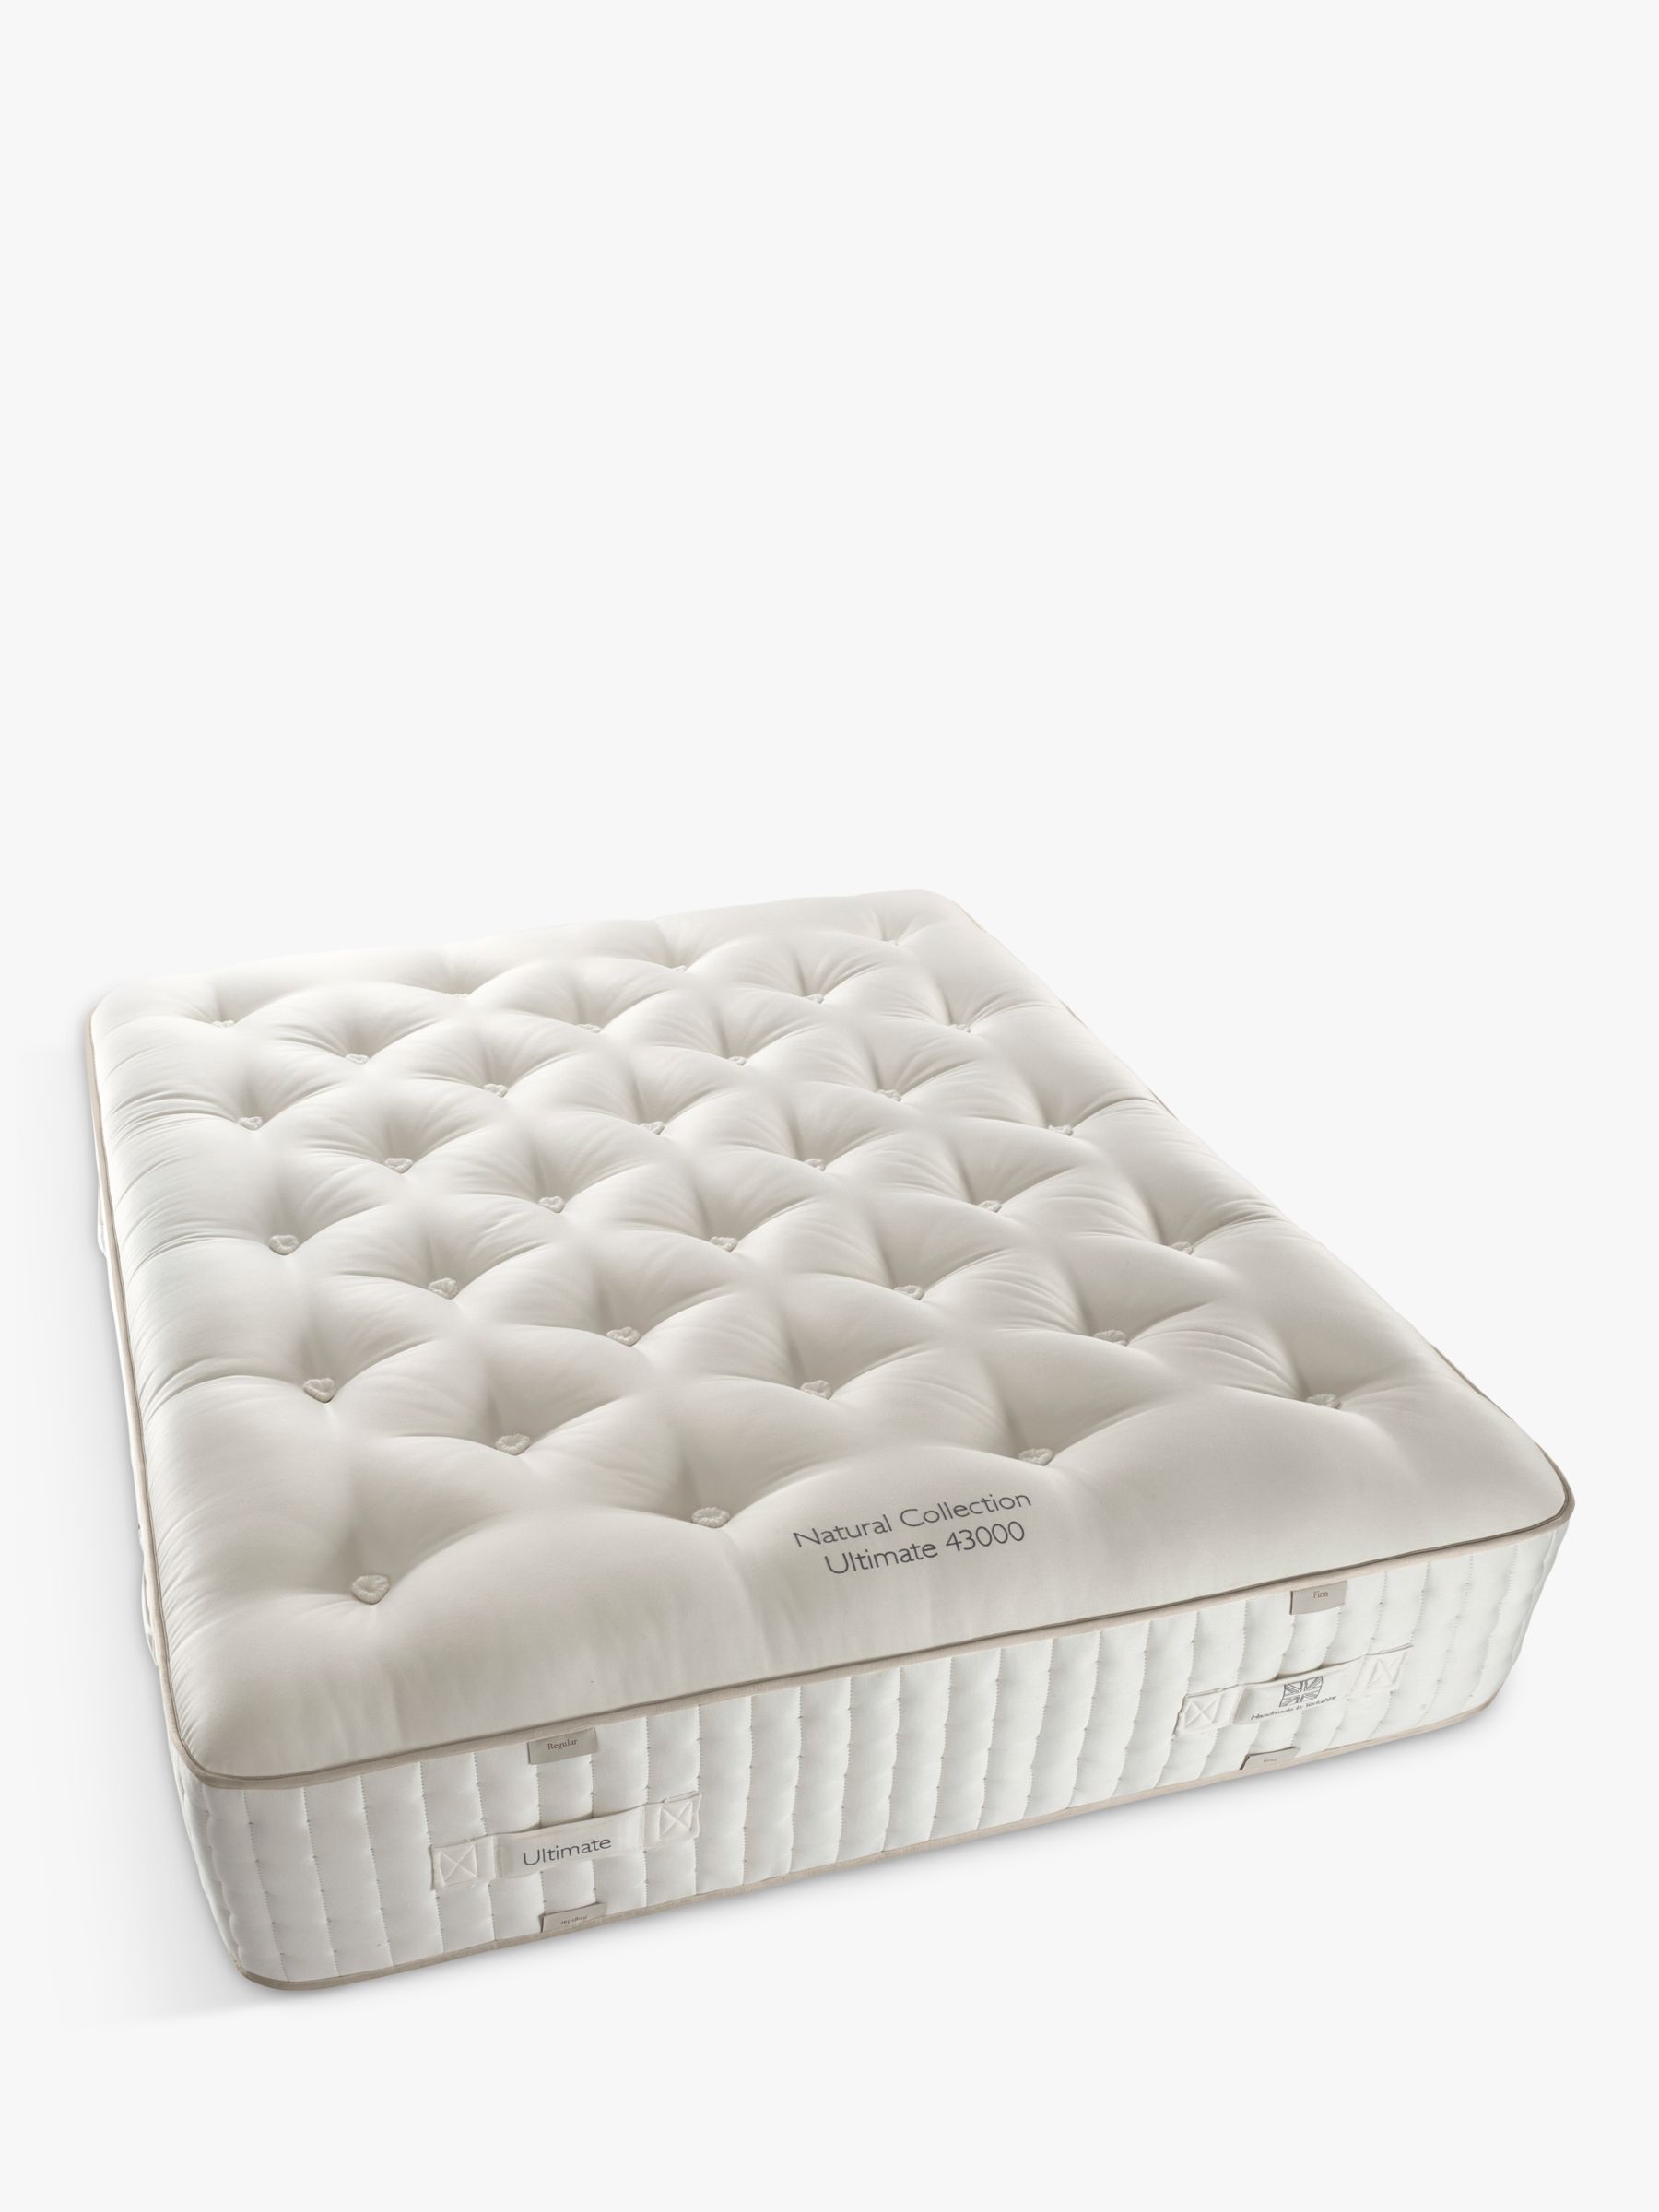 Photo of John lewis ultimate natural collection 43000 super king size firmer tension pocket spring mattress